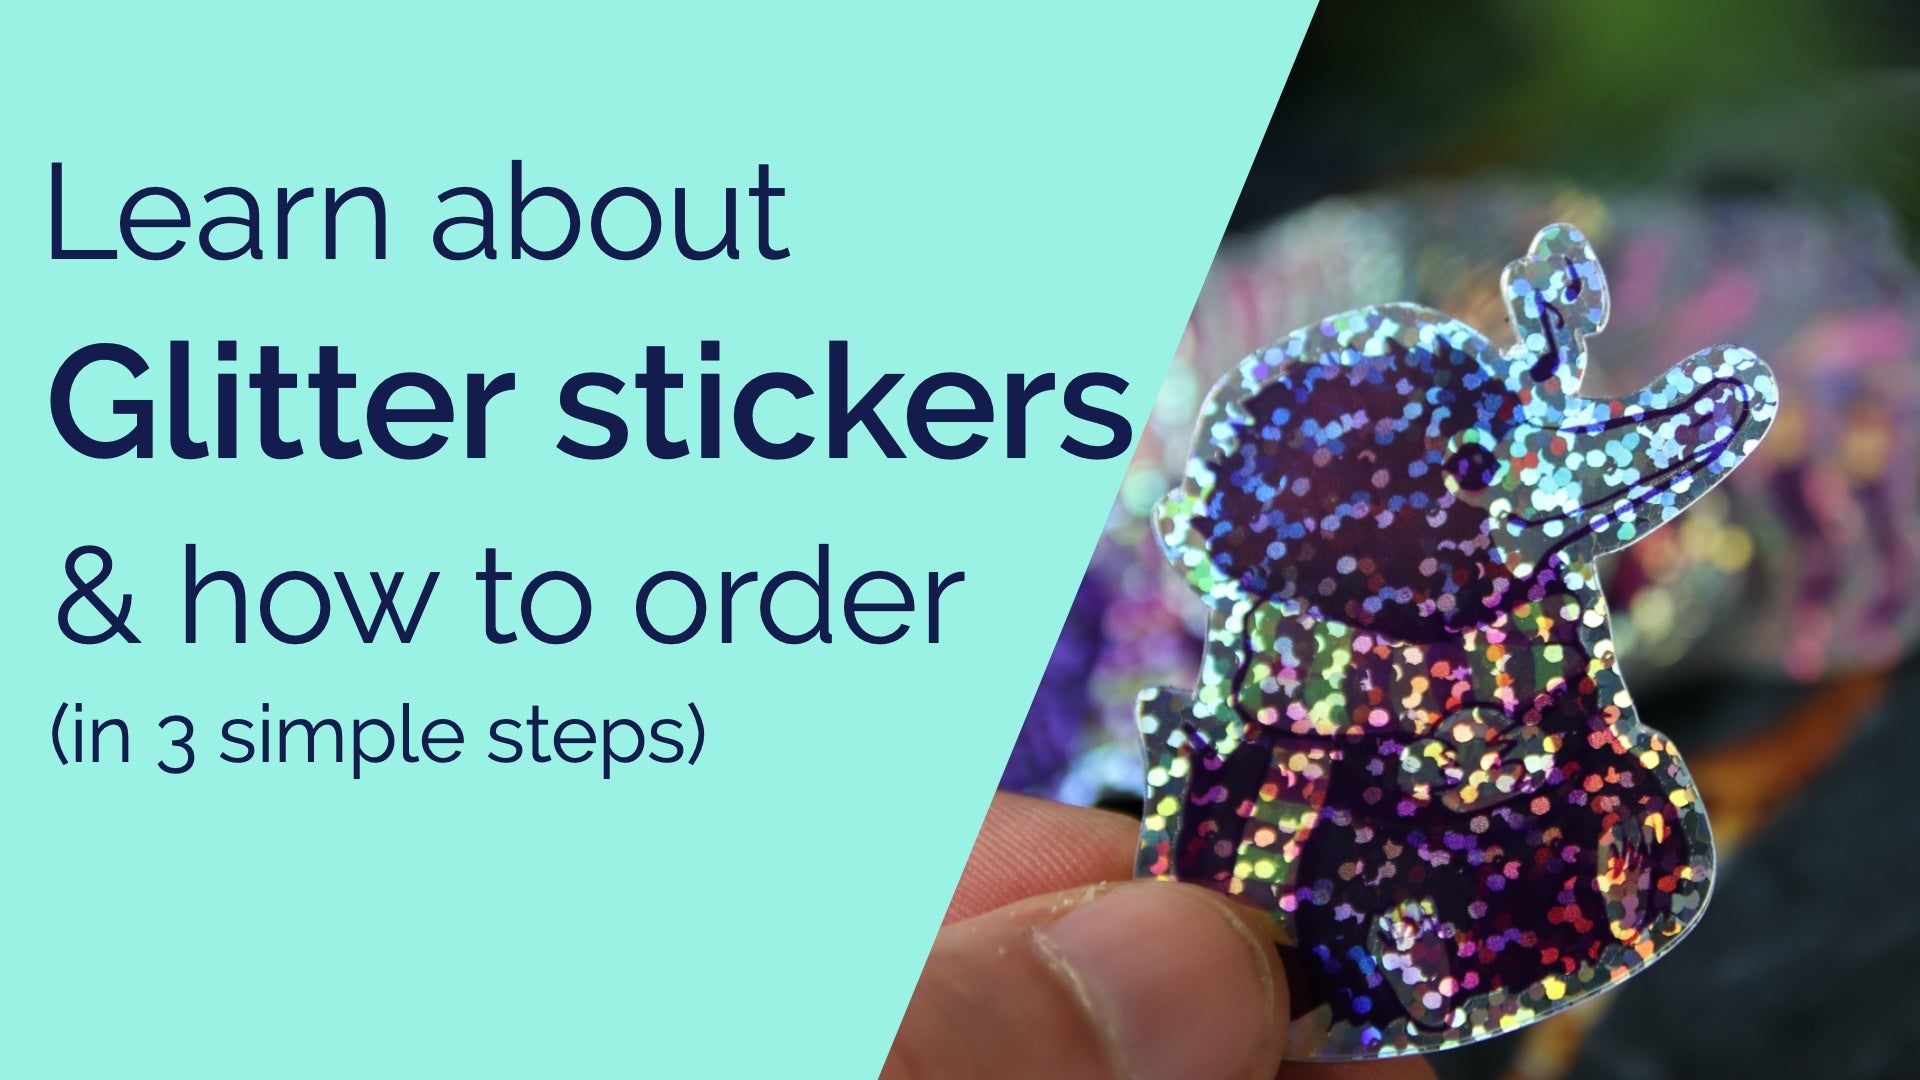 Load video: Video about glitter stickers and how to order